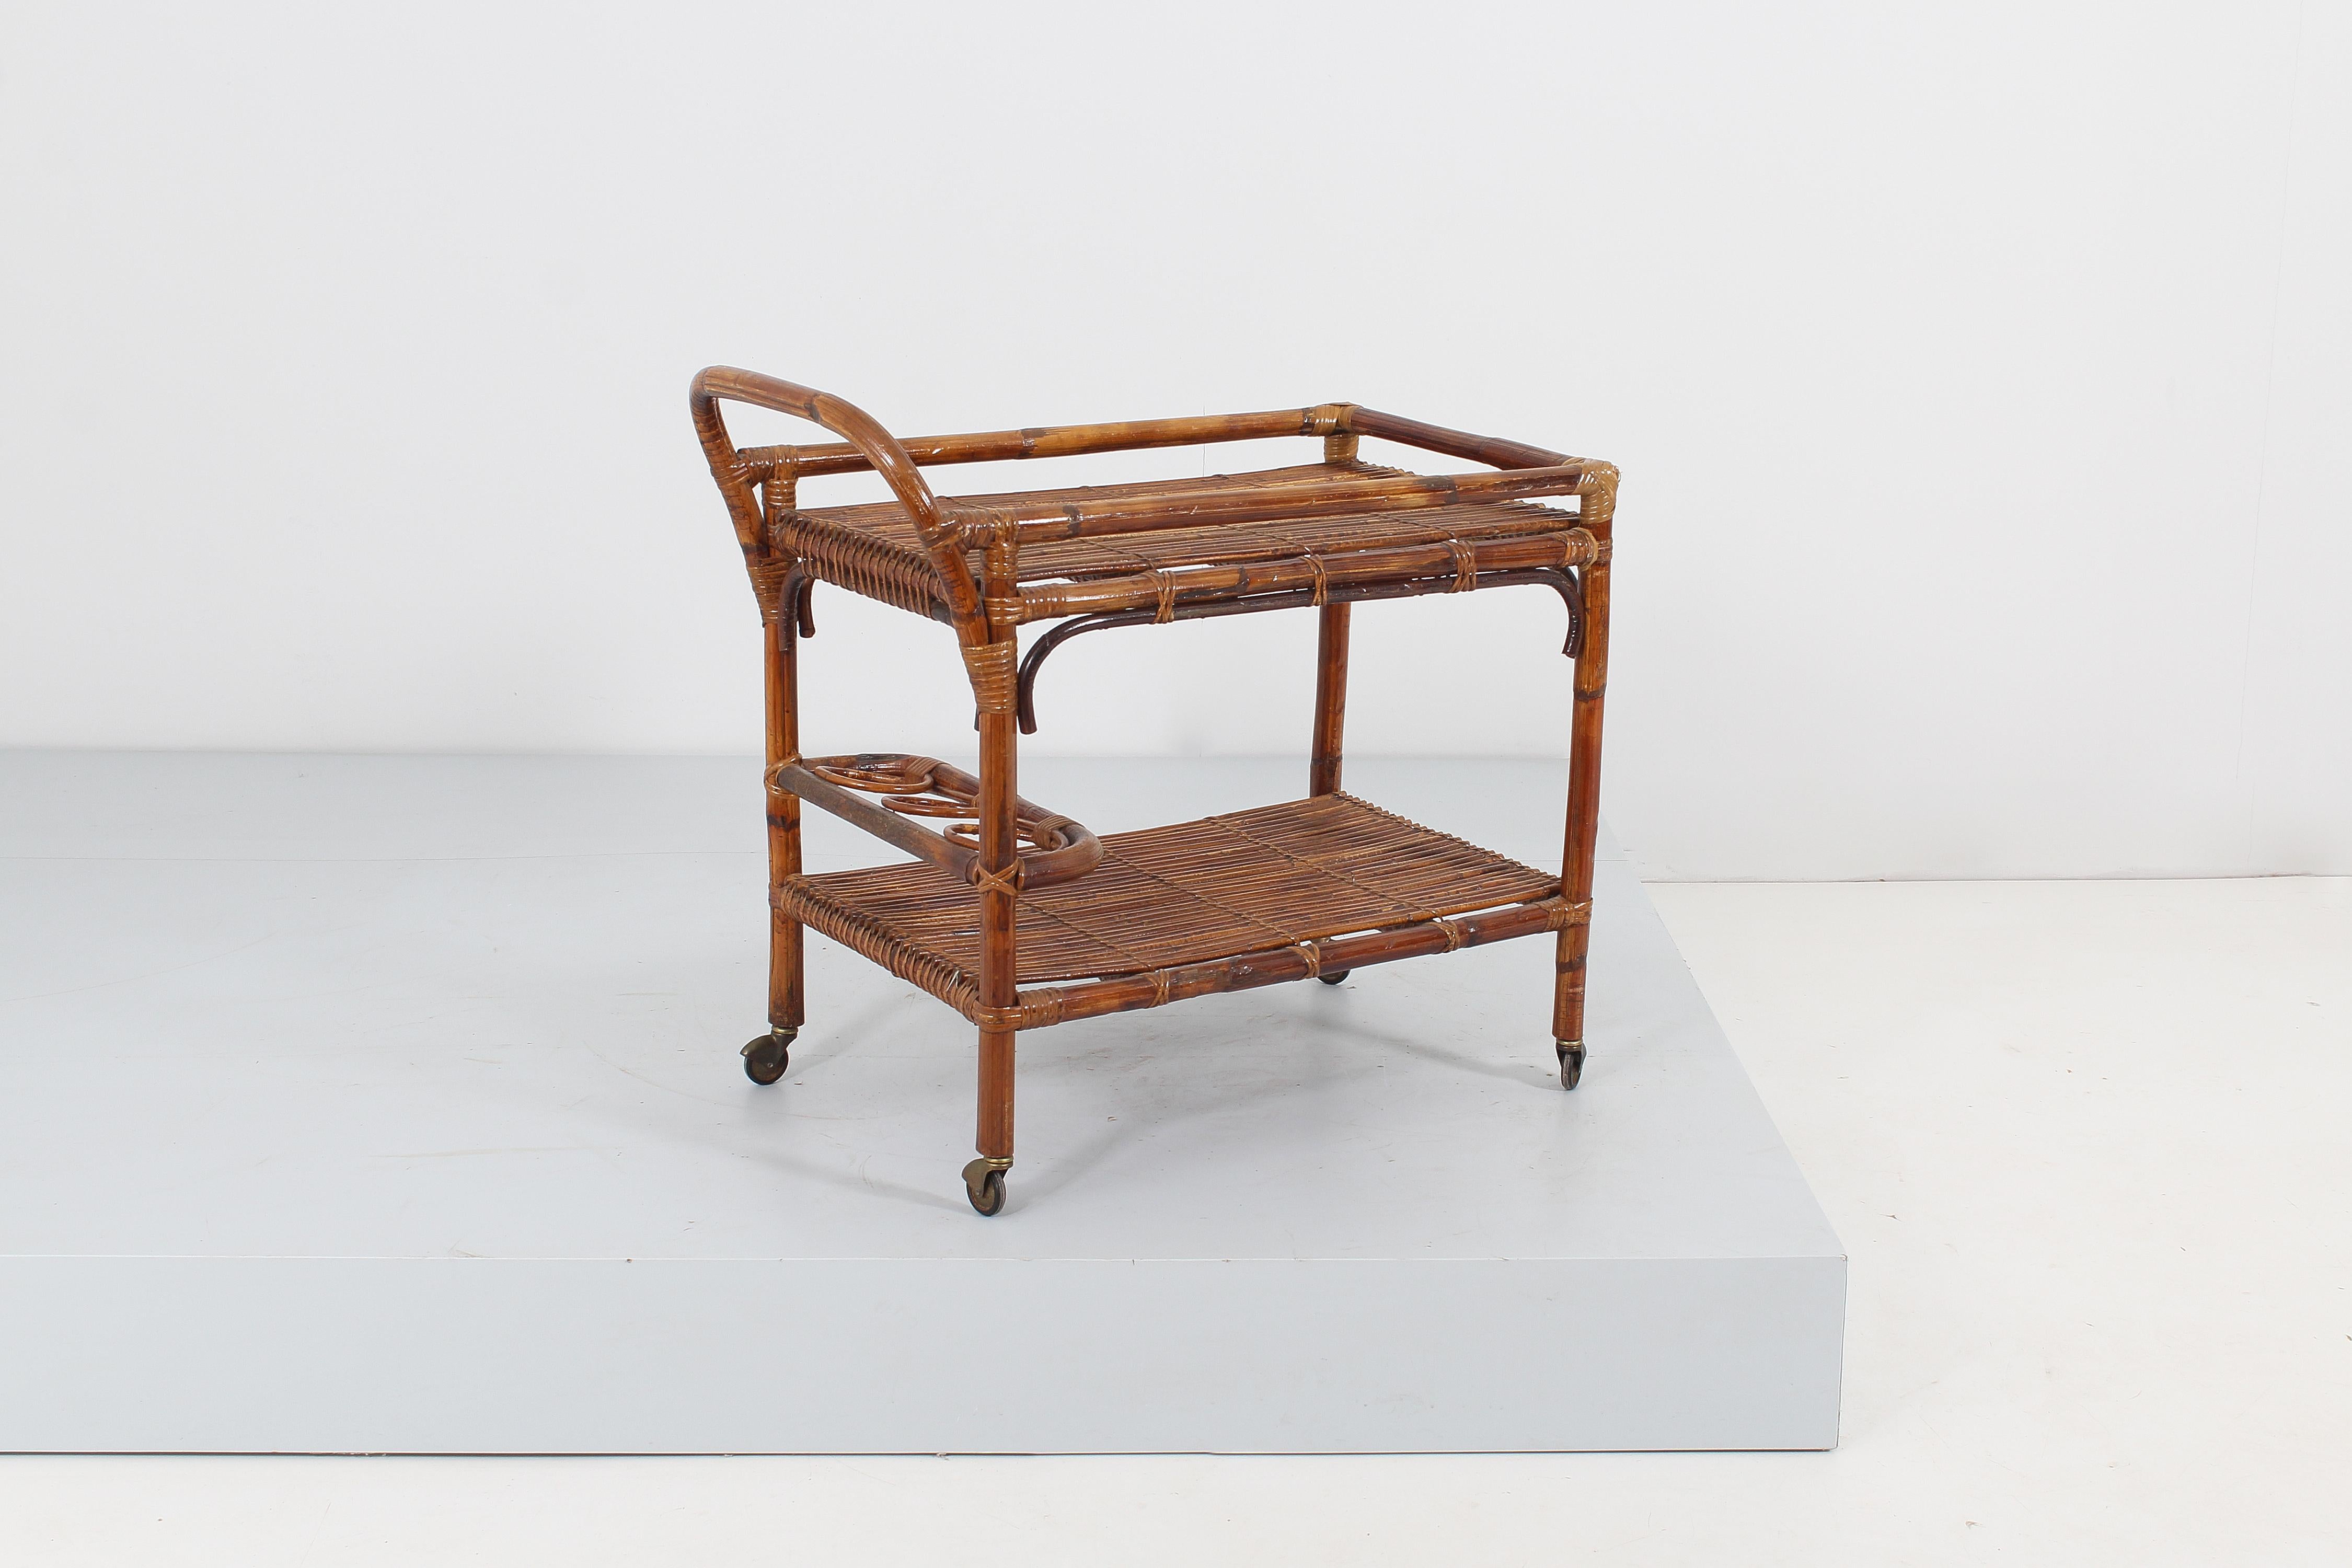 Elegant bar cart in bamboo rods and rattan, with two large shelves with bottle holder, resting on four gilt brass wheels. Attributable to Tito Agnoli for Bonacina, Italian manufacture in the 1960s
Wear consistent with age and use.